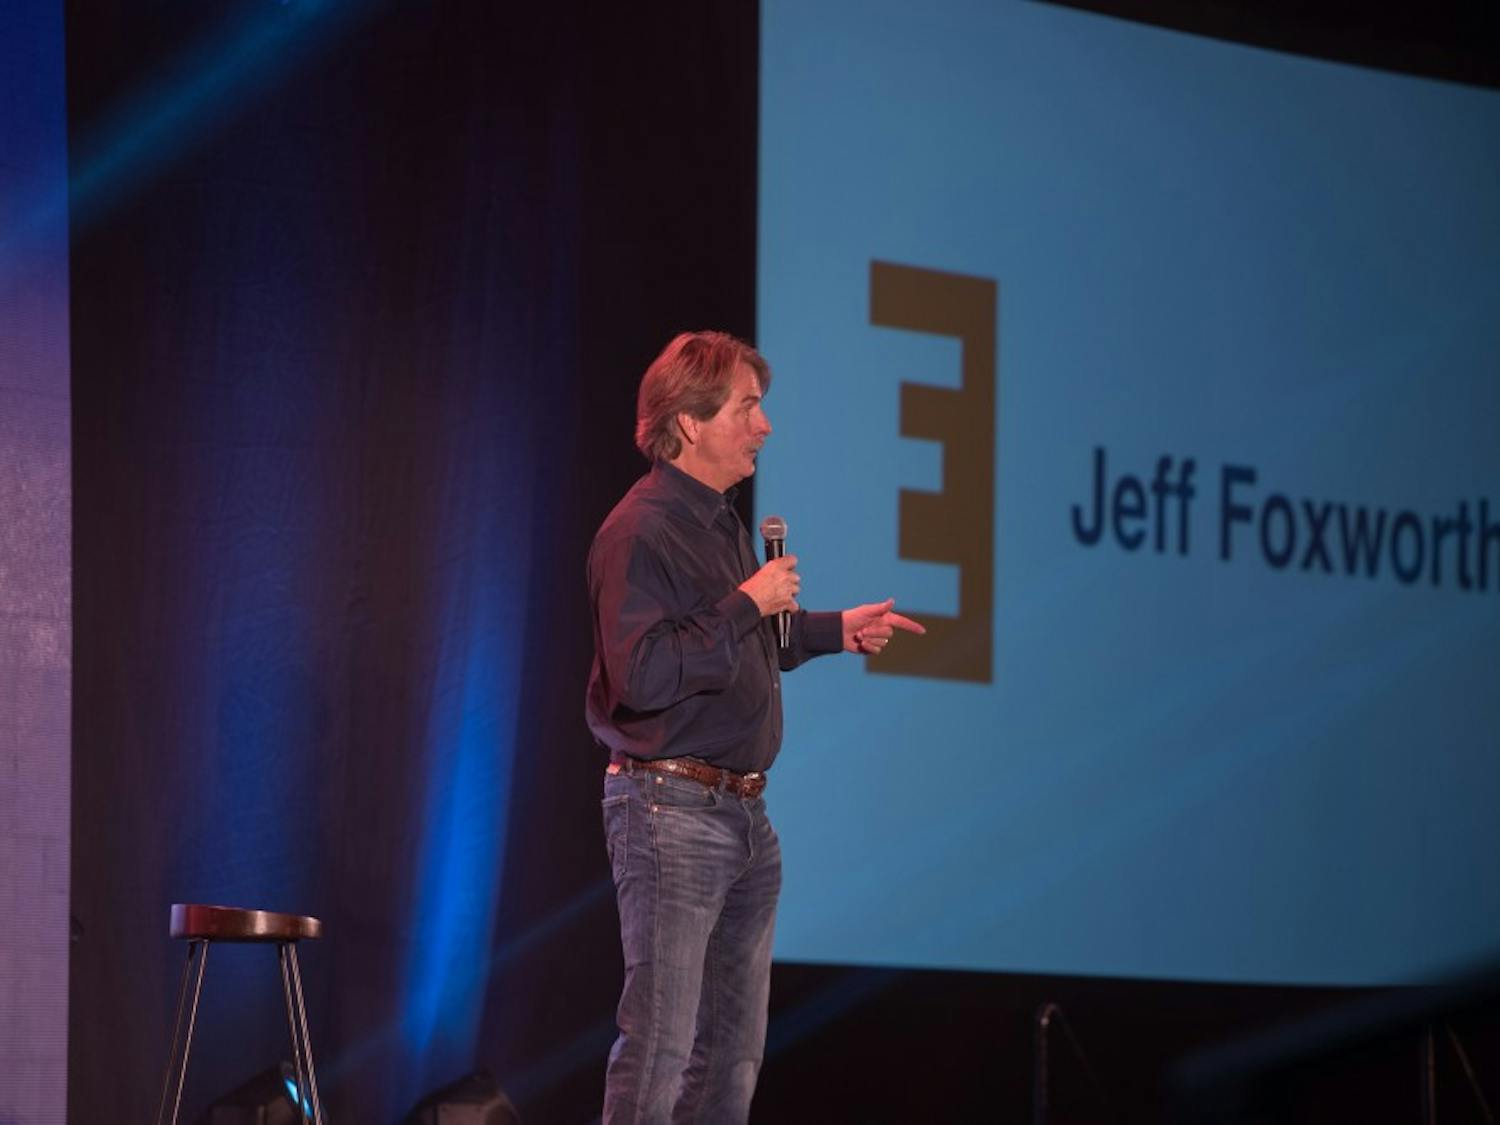 Jeff Foxworthy speaks at the kick-off event for Emerge, the comprehensive leadership program that replaced Freshman Leadership Programs, in Auburn, Ala., on Sunday, Aug. 27, 2017.